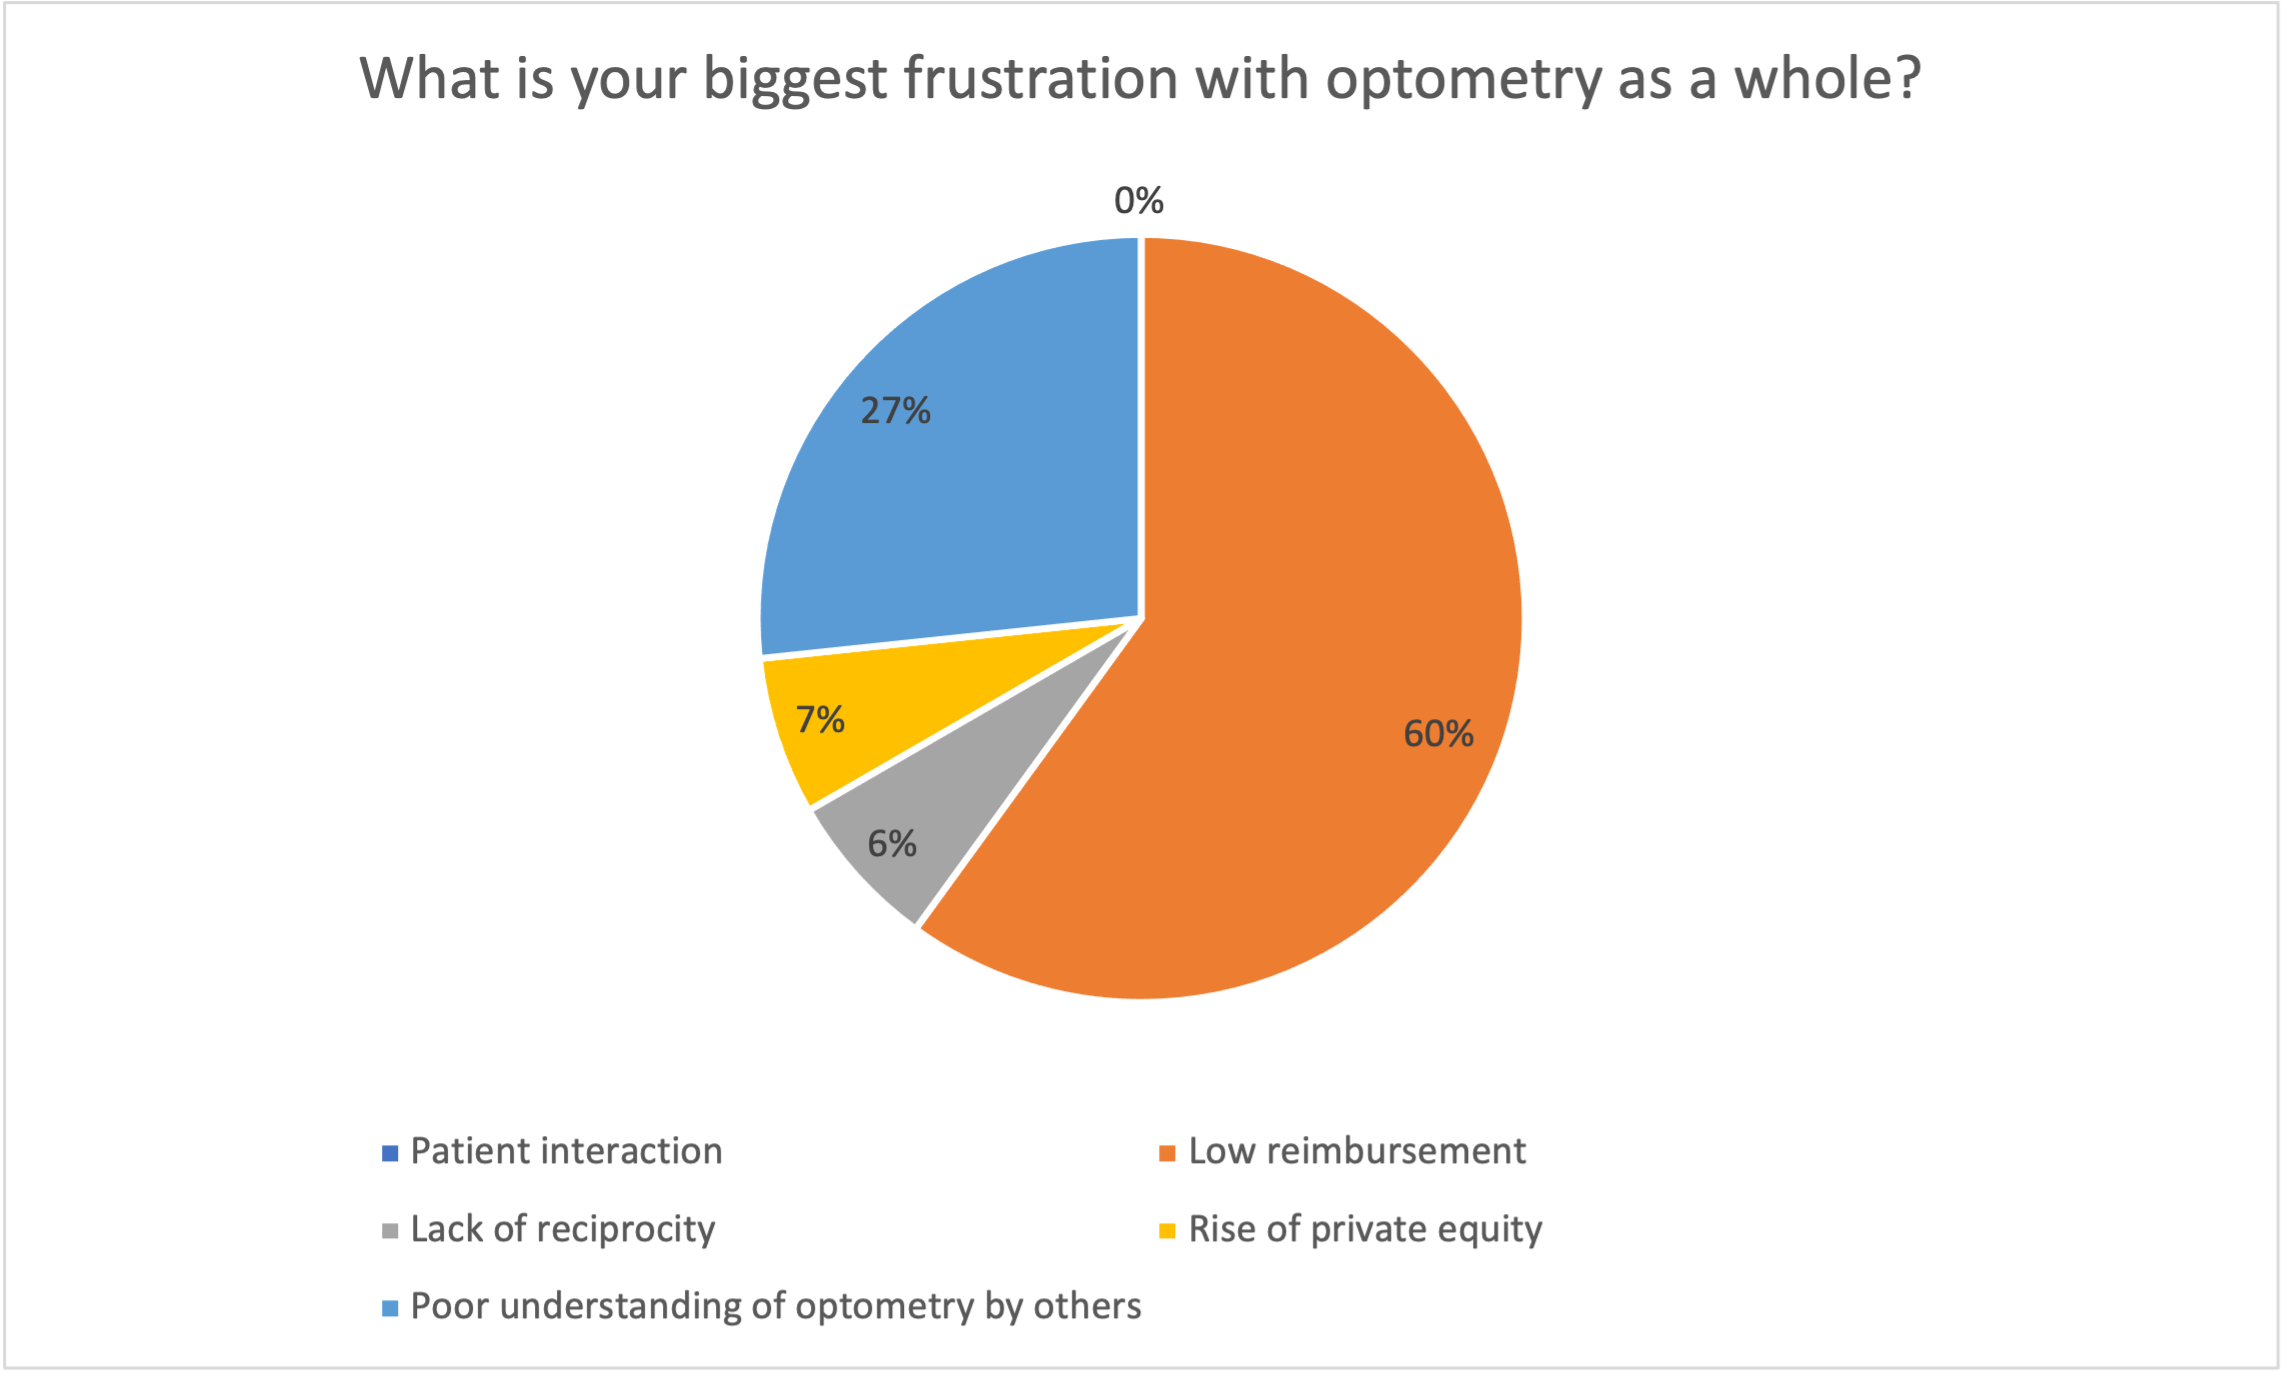 Poll results: What is your biggest frustration with optometry as a whole?